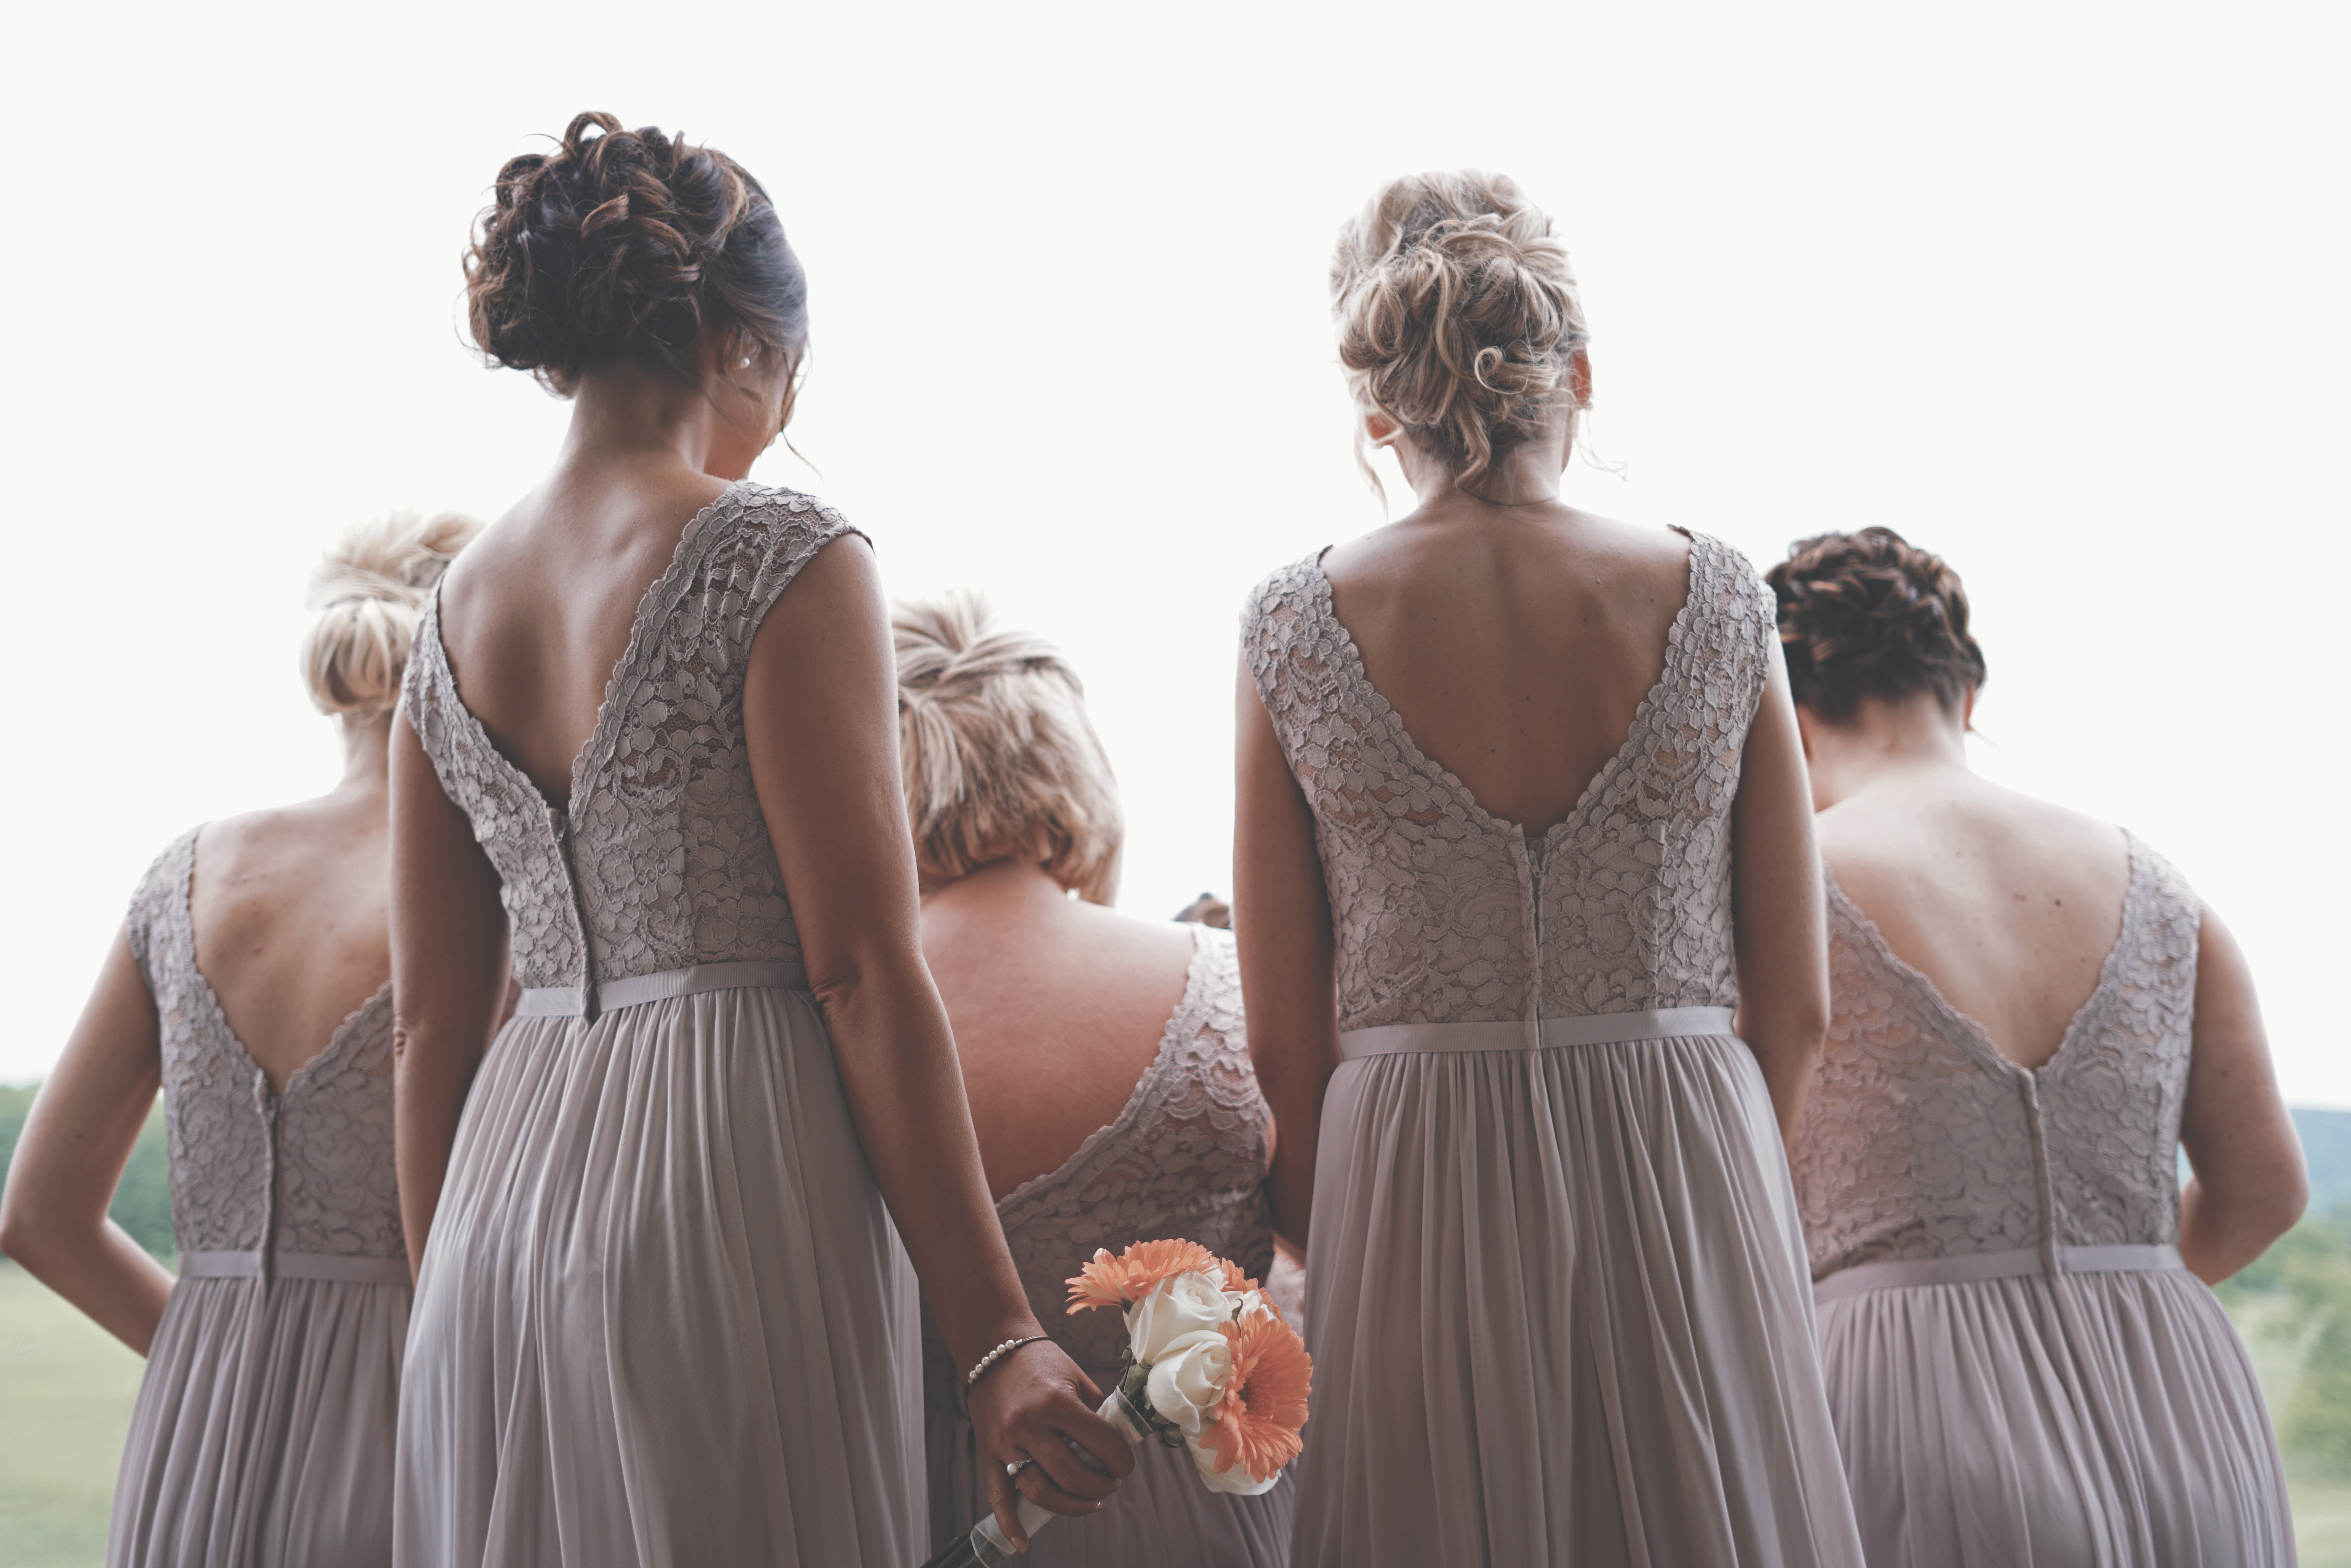 Who Should Be Your Bridesmaids